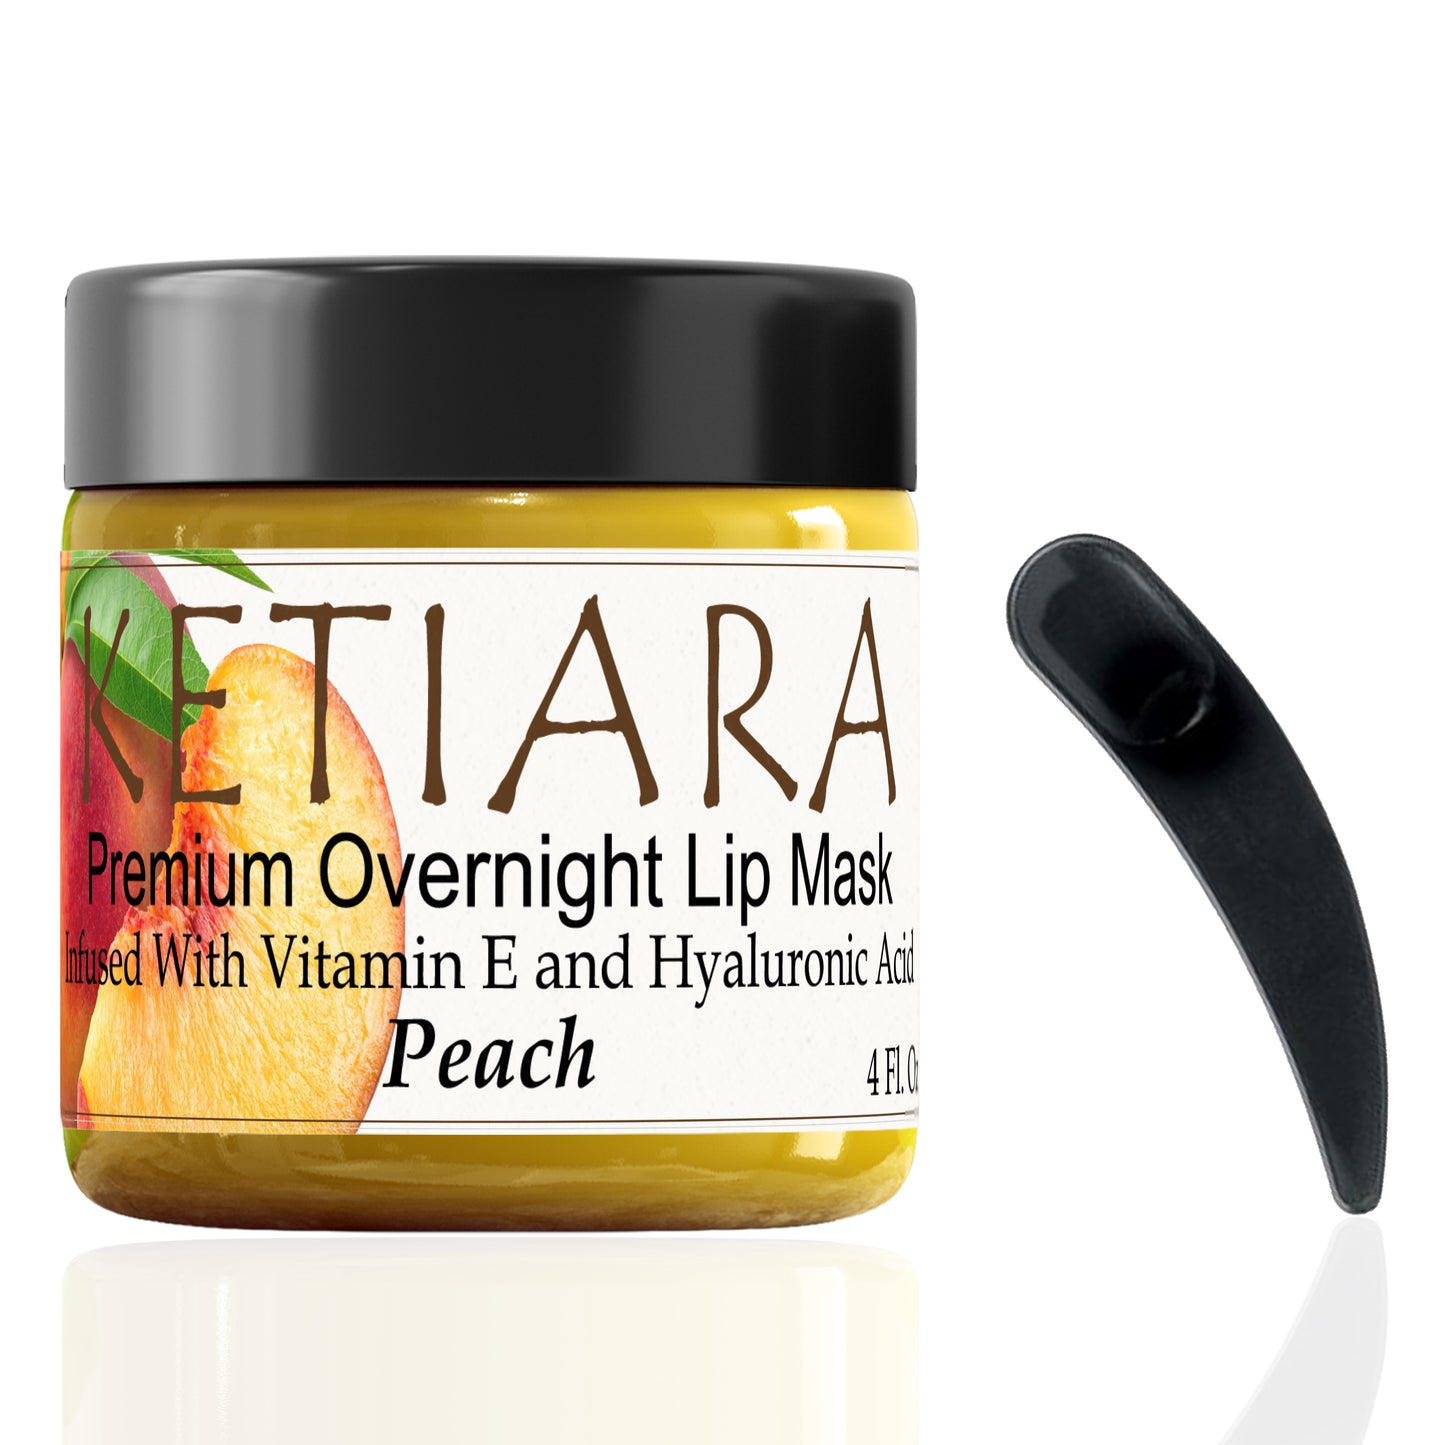 Ketiara Peach Nourishing and Hydrating Lip Sleeping Mask with Vitamin C, Hyaluronic Acid and More